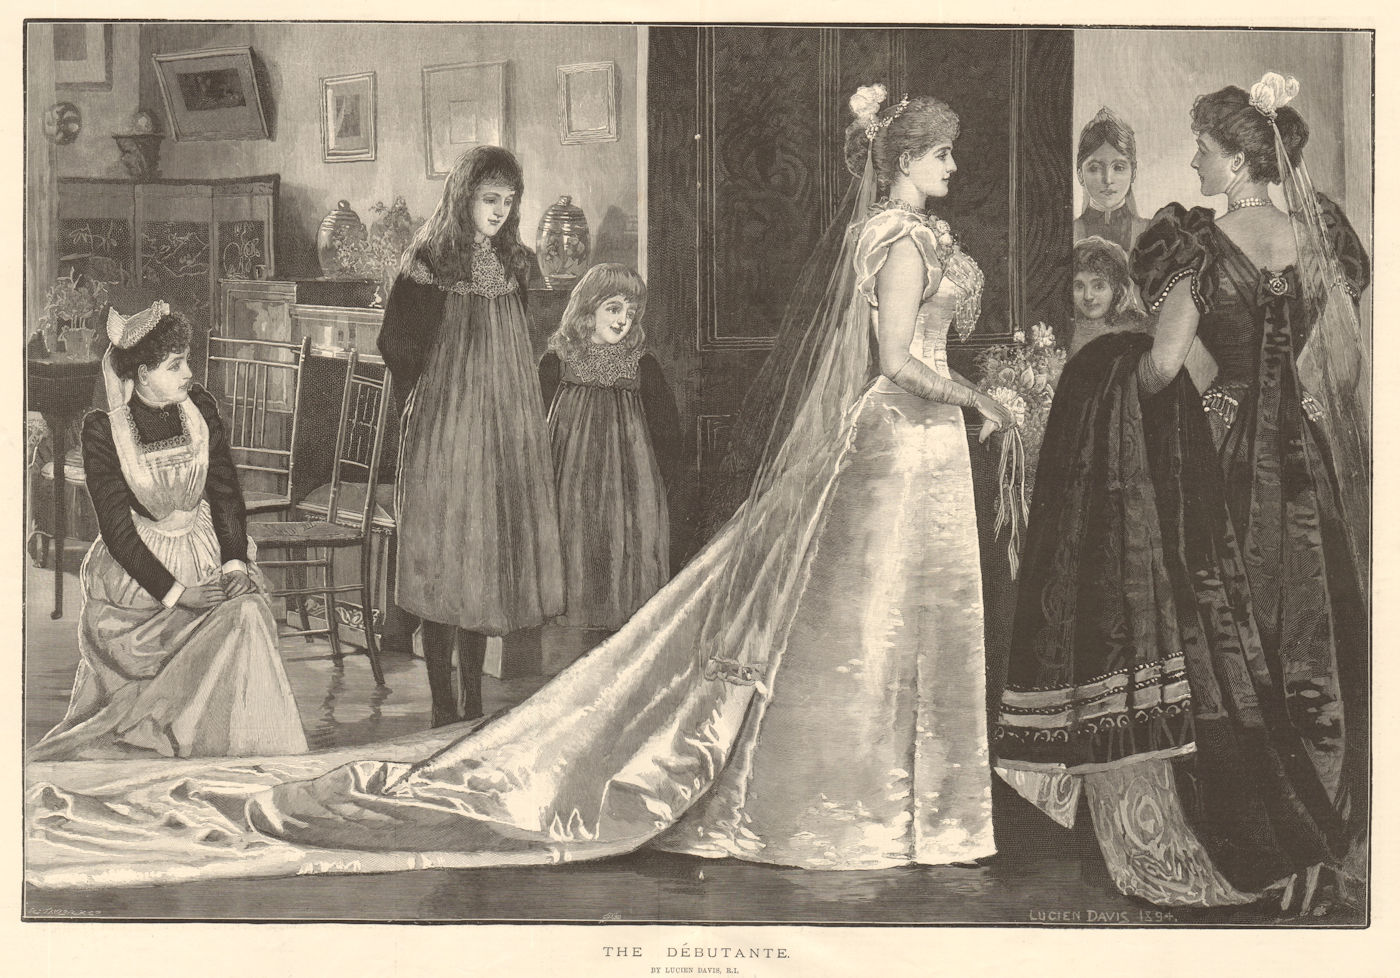 Associate Product "The debutante", by Lucien Davis. R. I. Society 1894 old antique print picture